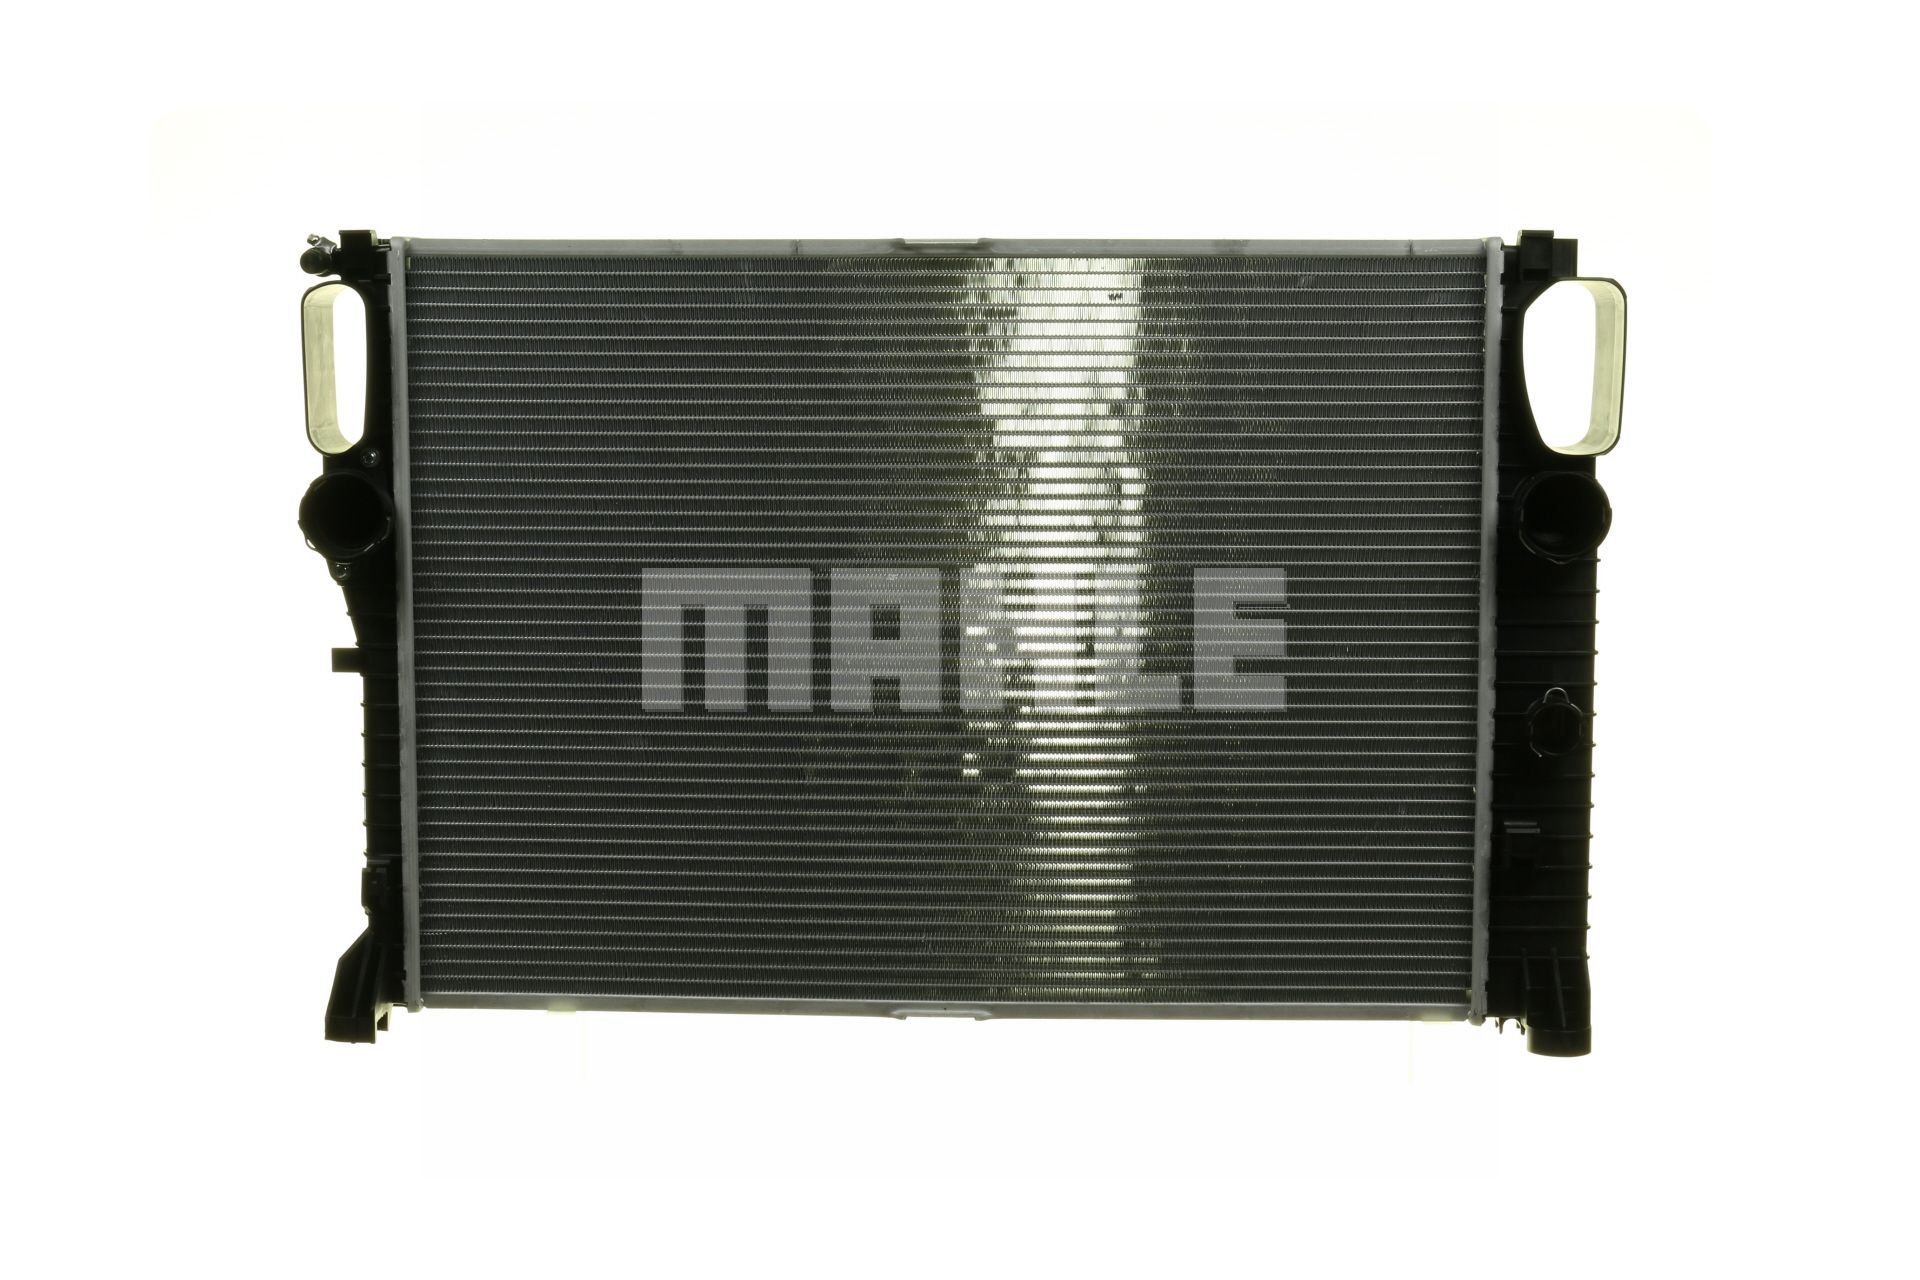 376769791 MAHLE ORIGINAL for vehicles with/without air conditioning, 640 x 459 x 38 mm, Automatic Transmission, Manual Transmission, Brazed cooling fins Radiator CR 1480 000S buy